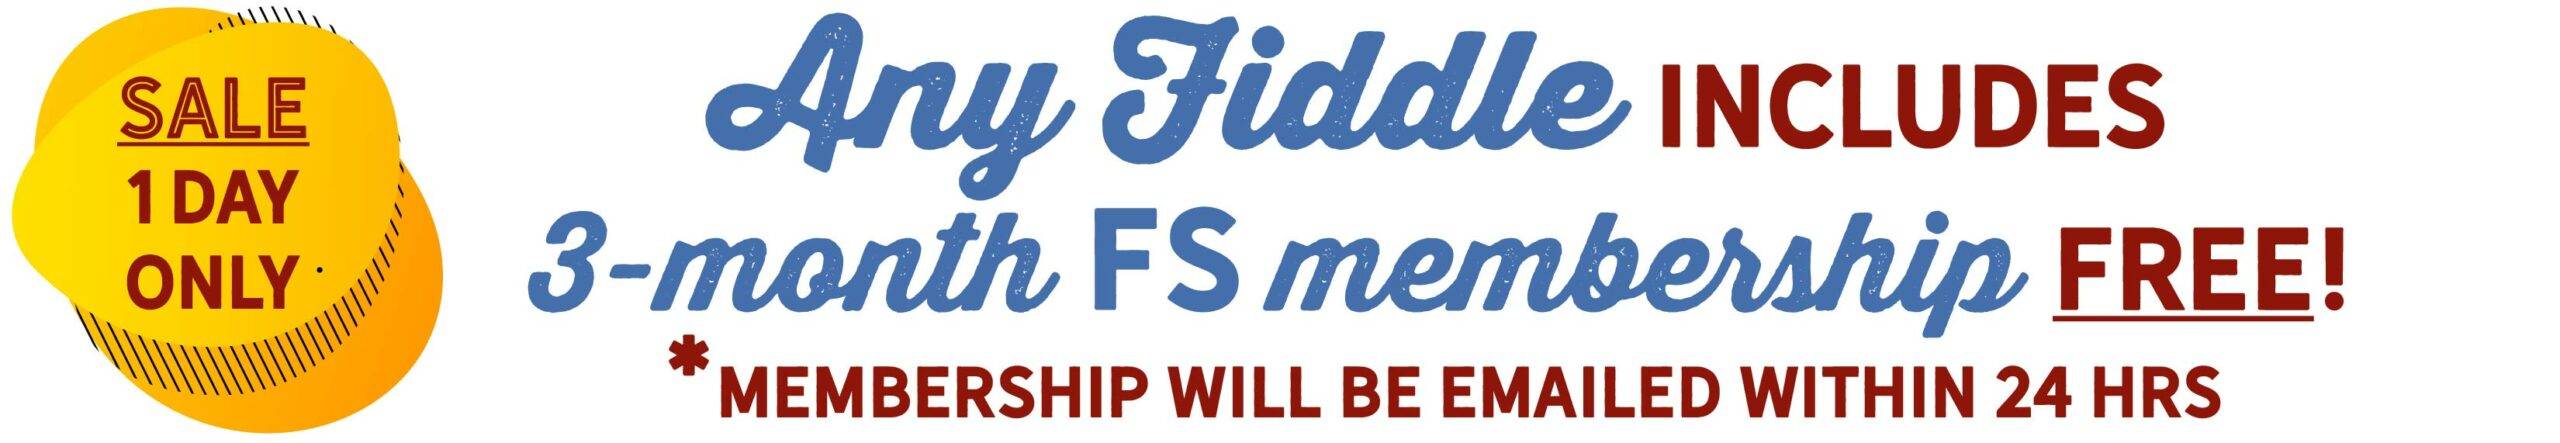 Any Fiddle includes 3-month membership